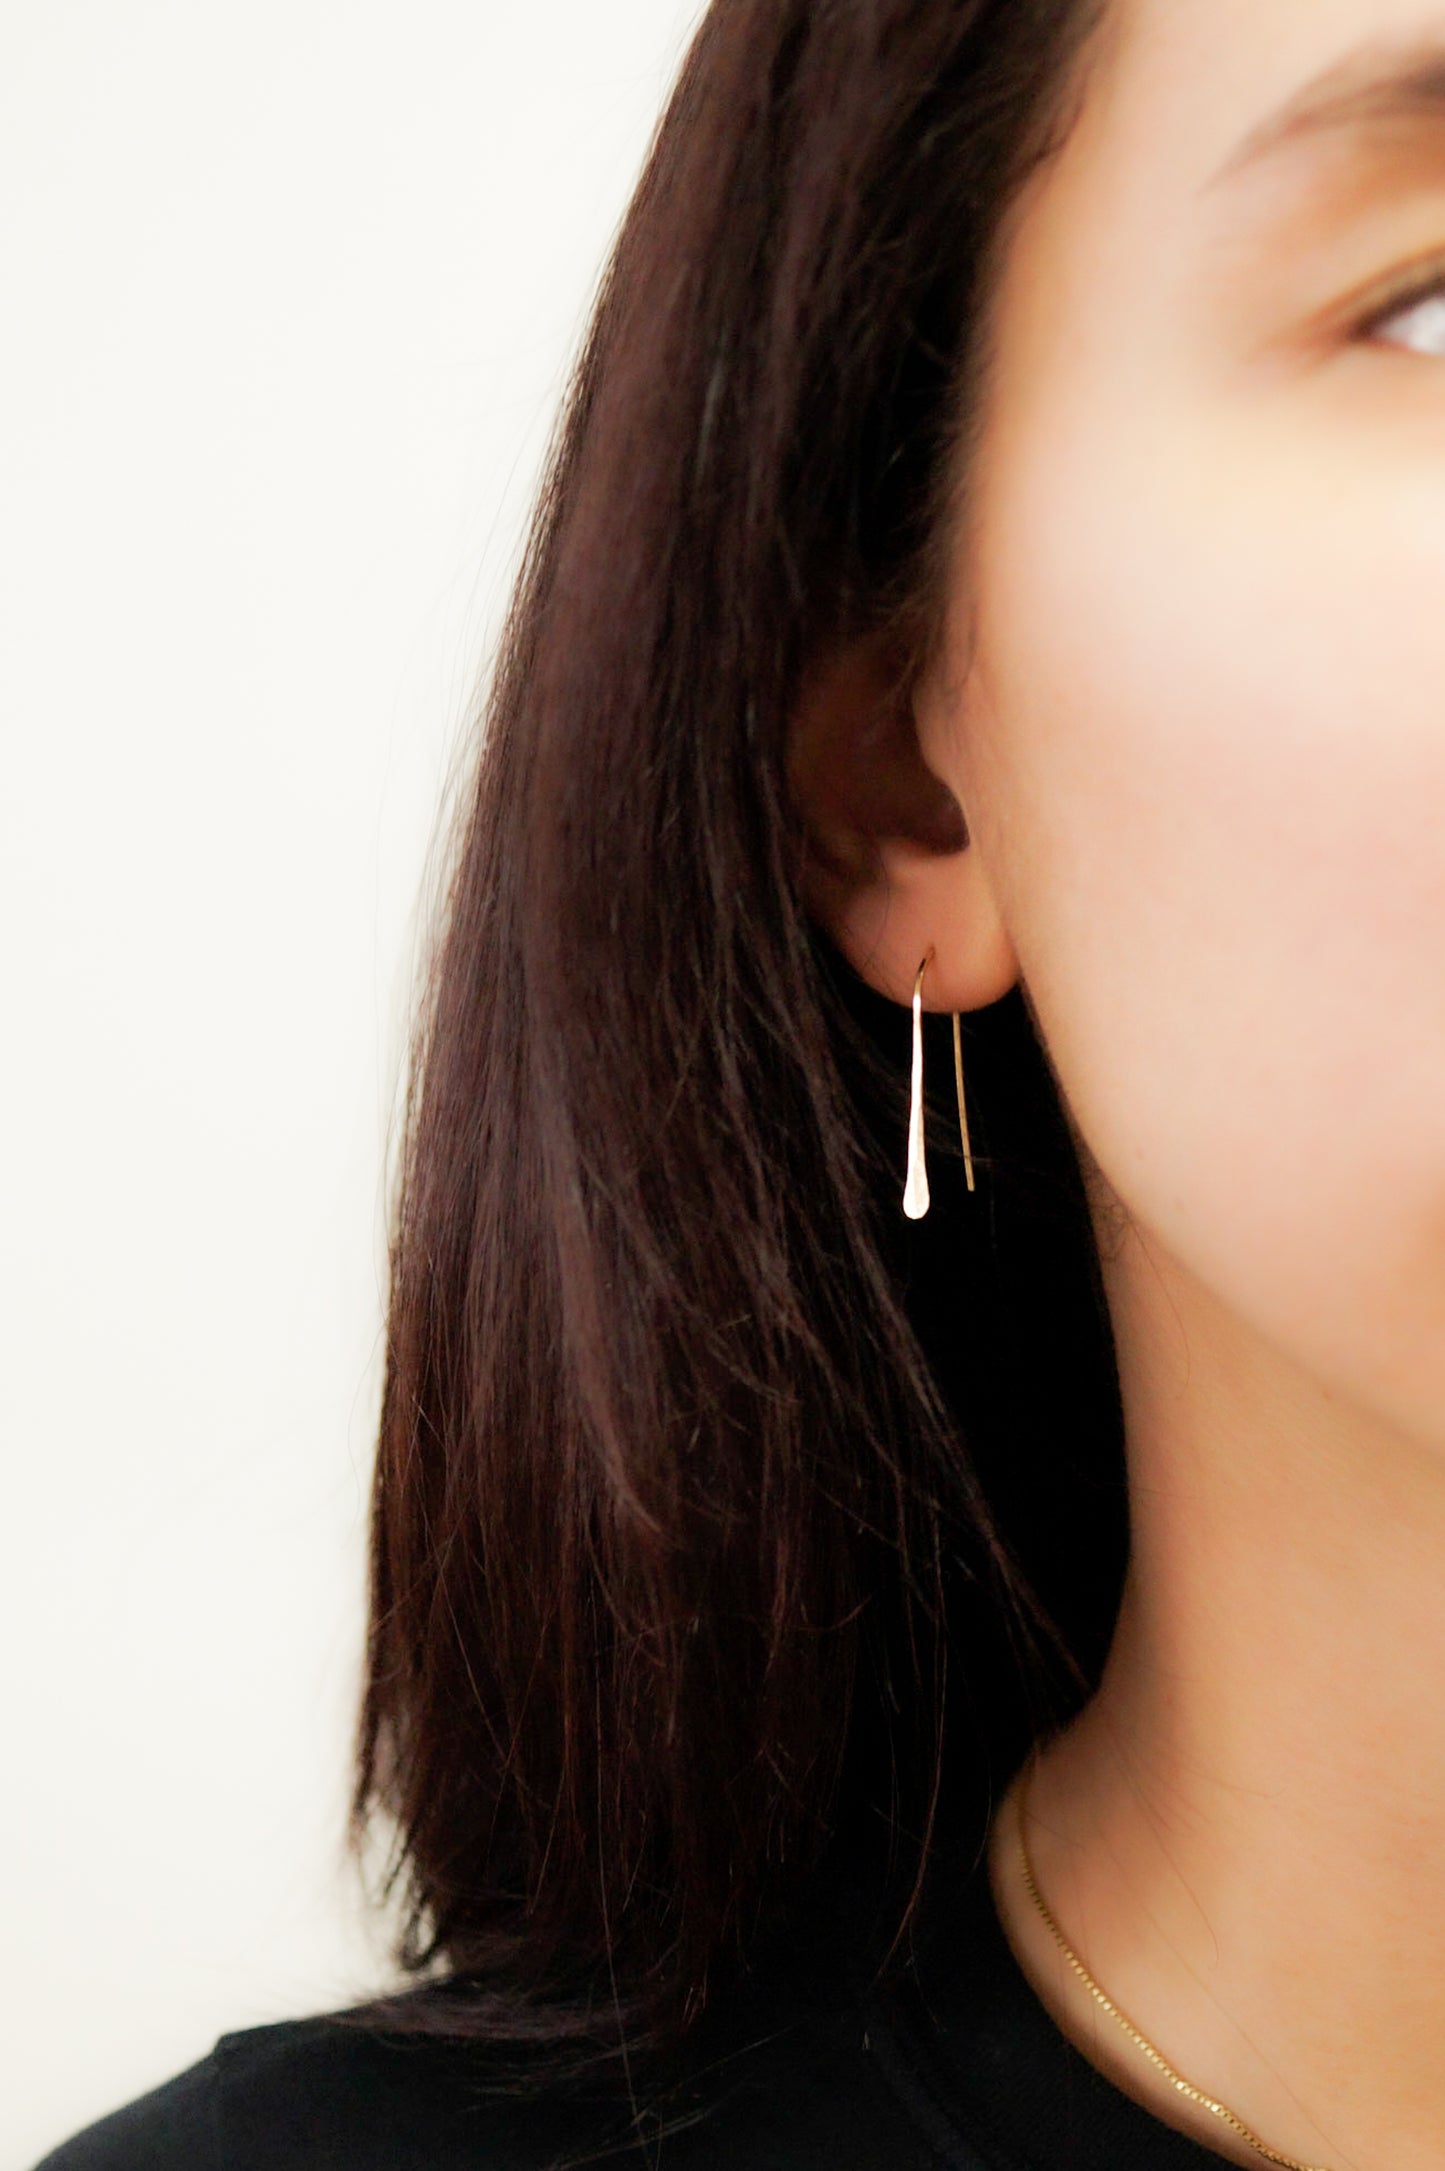 Small Arch Earrings, Gold Fill, Rose Gold, or Sterling Silver